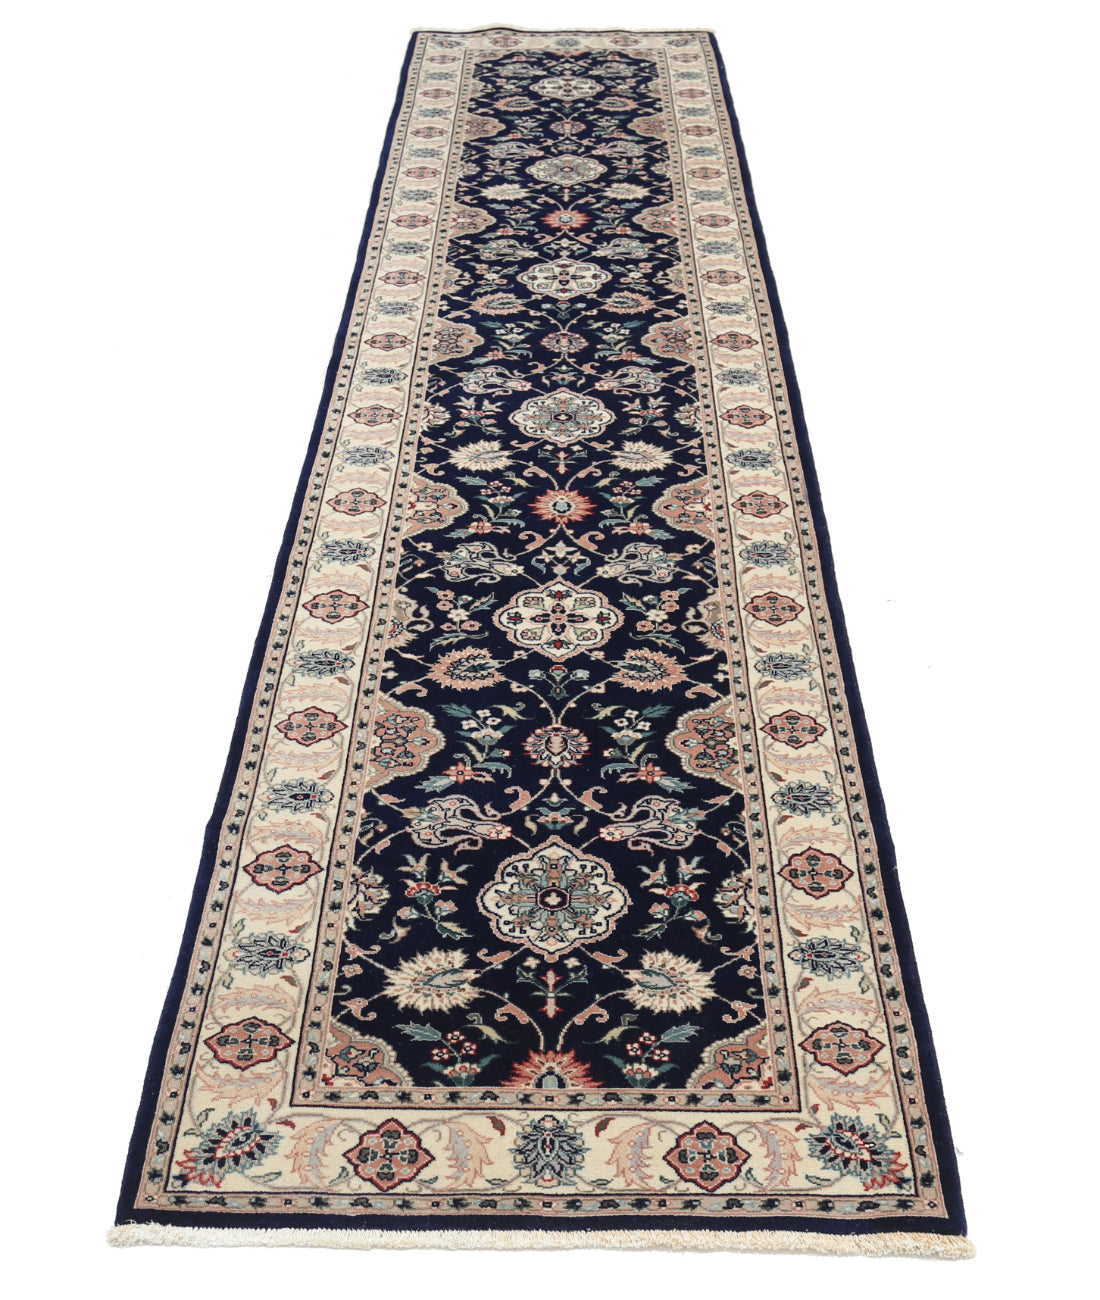 Hand Knotted Heritage Fine Persian Style Wool Rug - 2'7'' x 11'9'' 2' 7" X 11' 9" (79 X 358) / Blue / Ivory